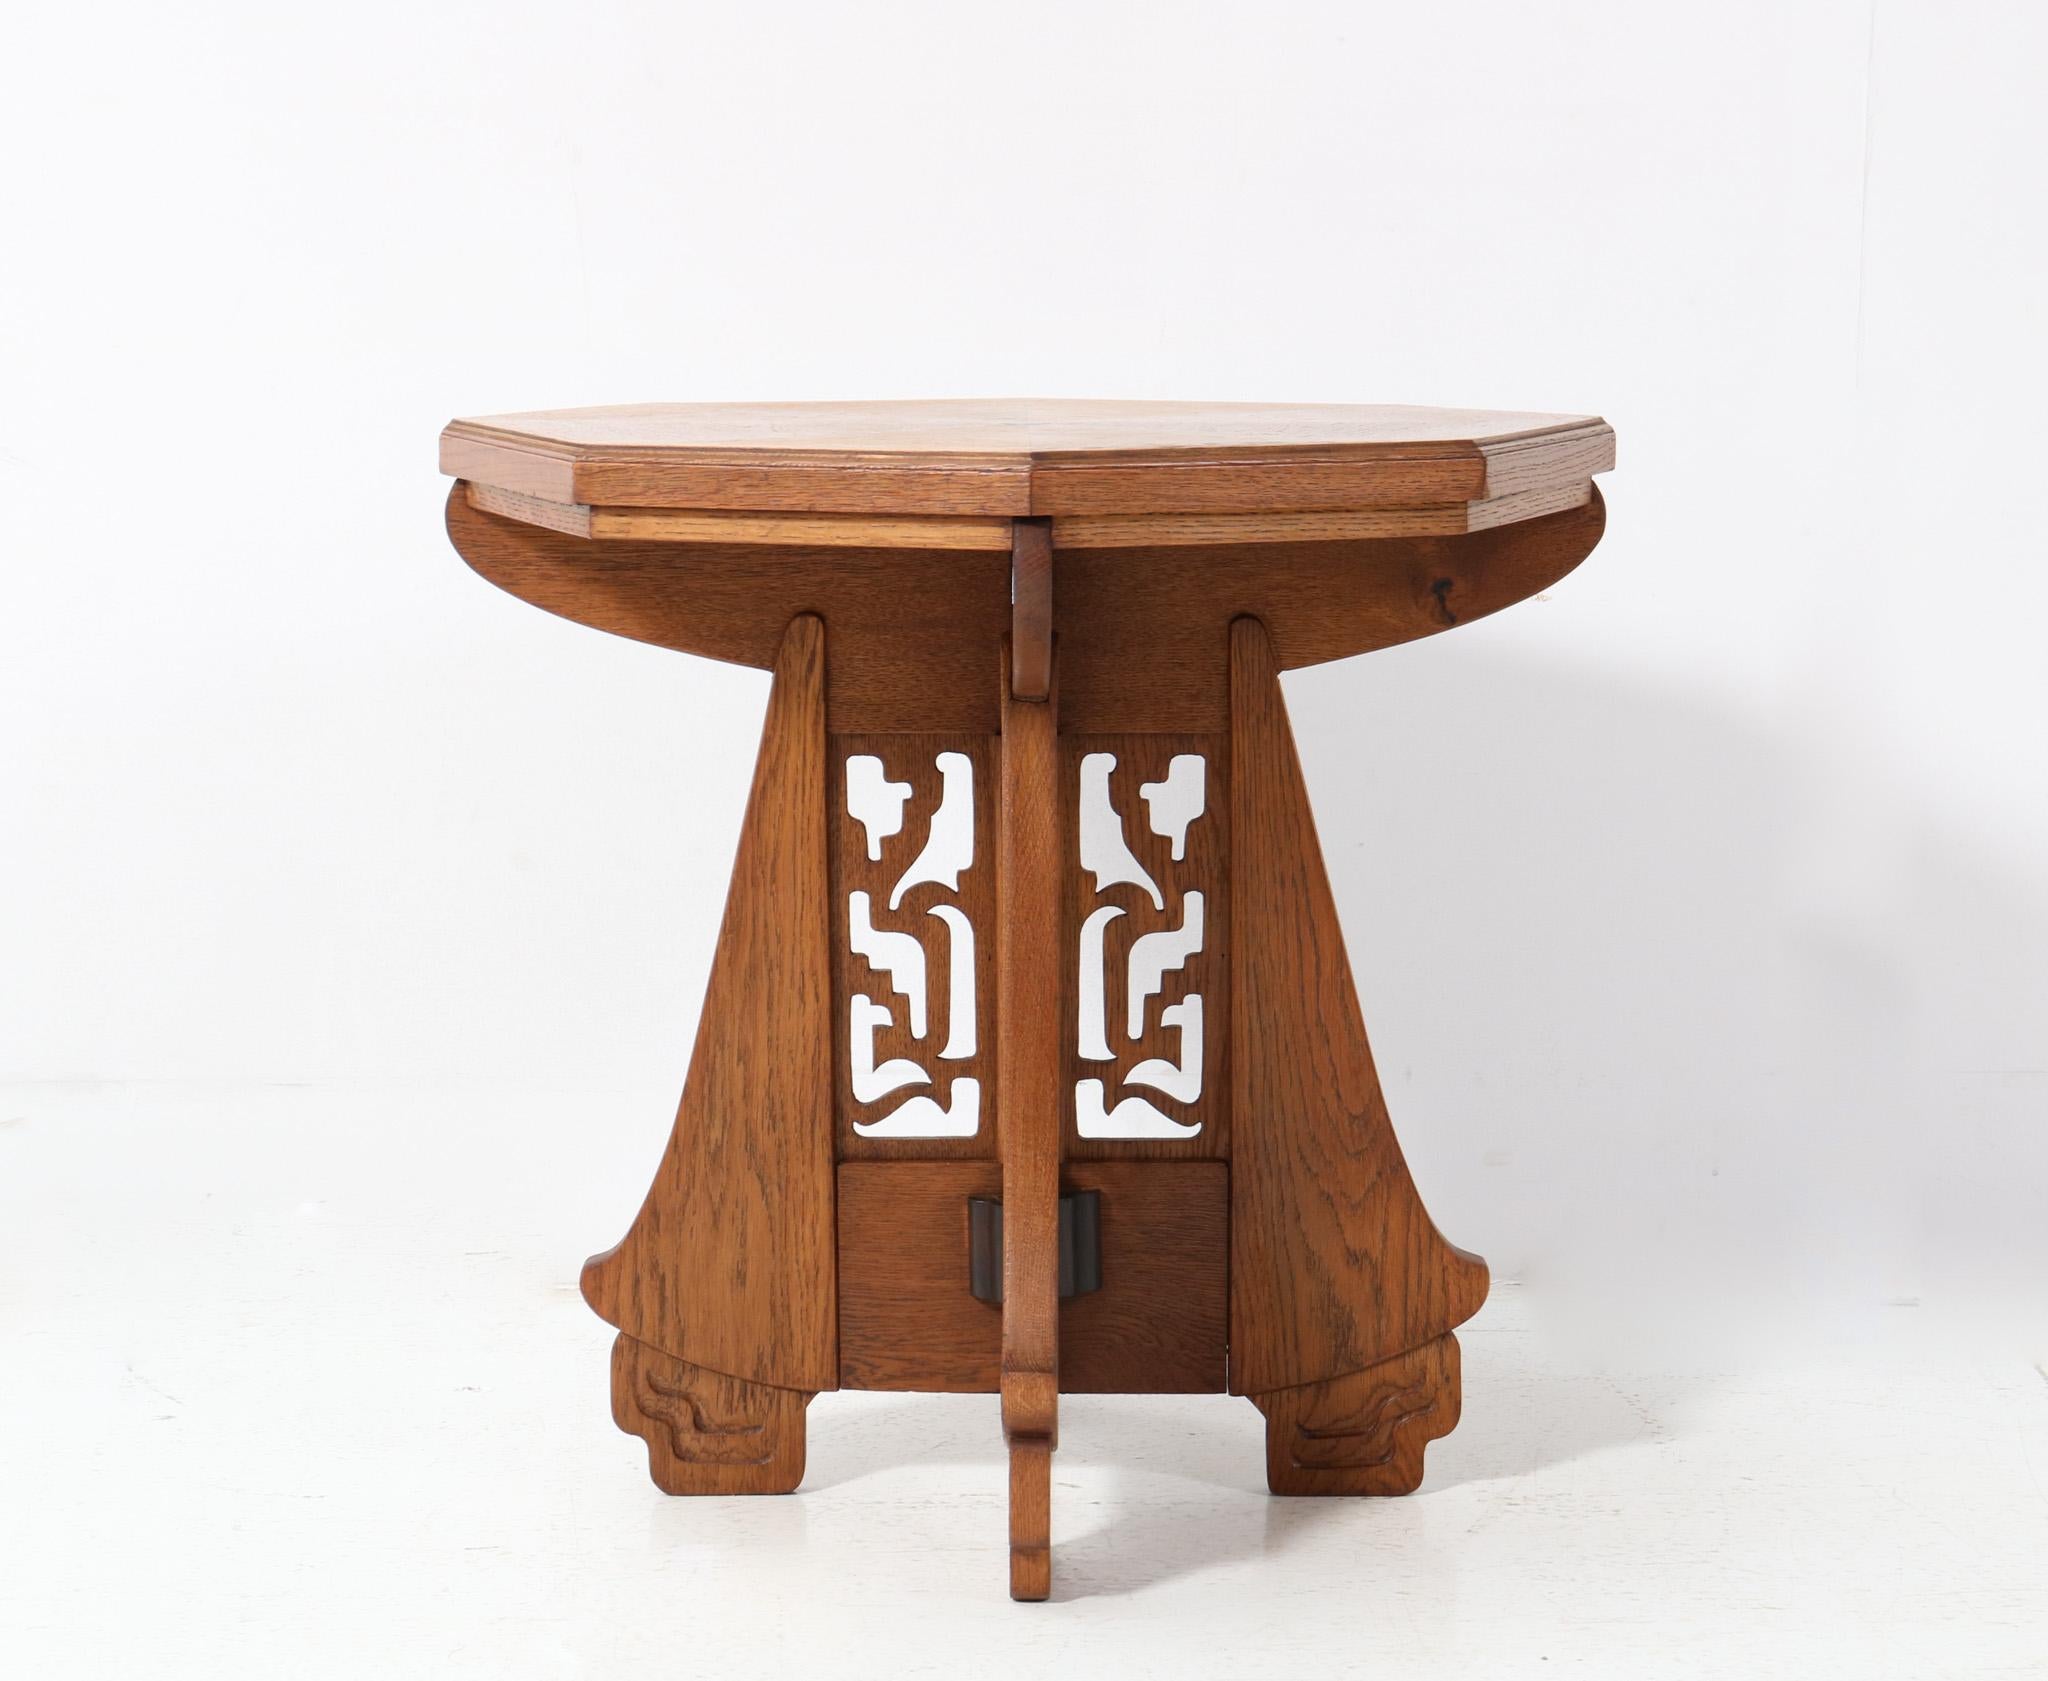 Magnificent and ultra rare Art Deco Amsterdamse School side table.
Design attributed to Napoleon Le Grand Amsterdam.
Striking Dutch design from the 1920s.
Solid oak and solid macassar decorative base with original oak veneered top.
This wonderful